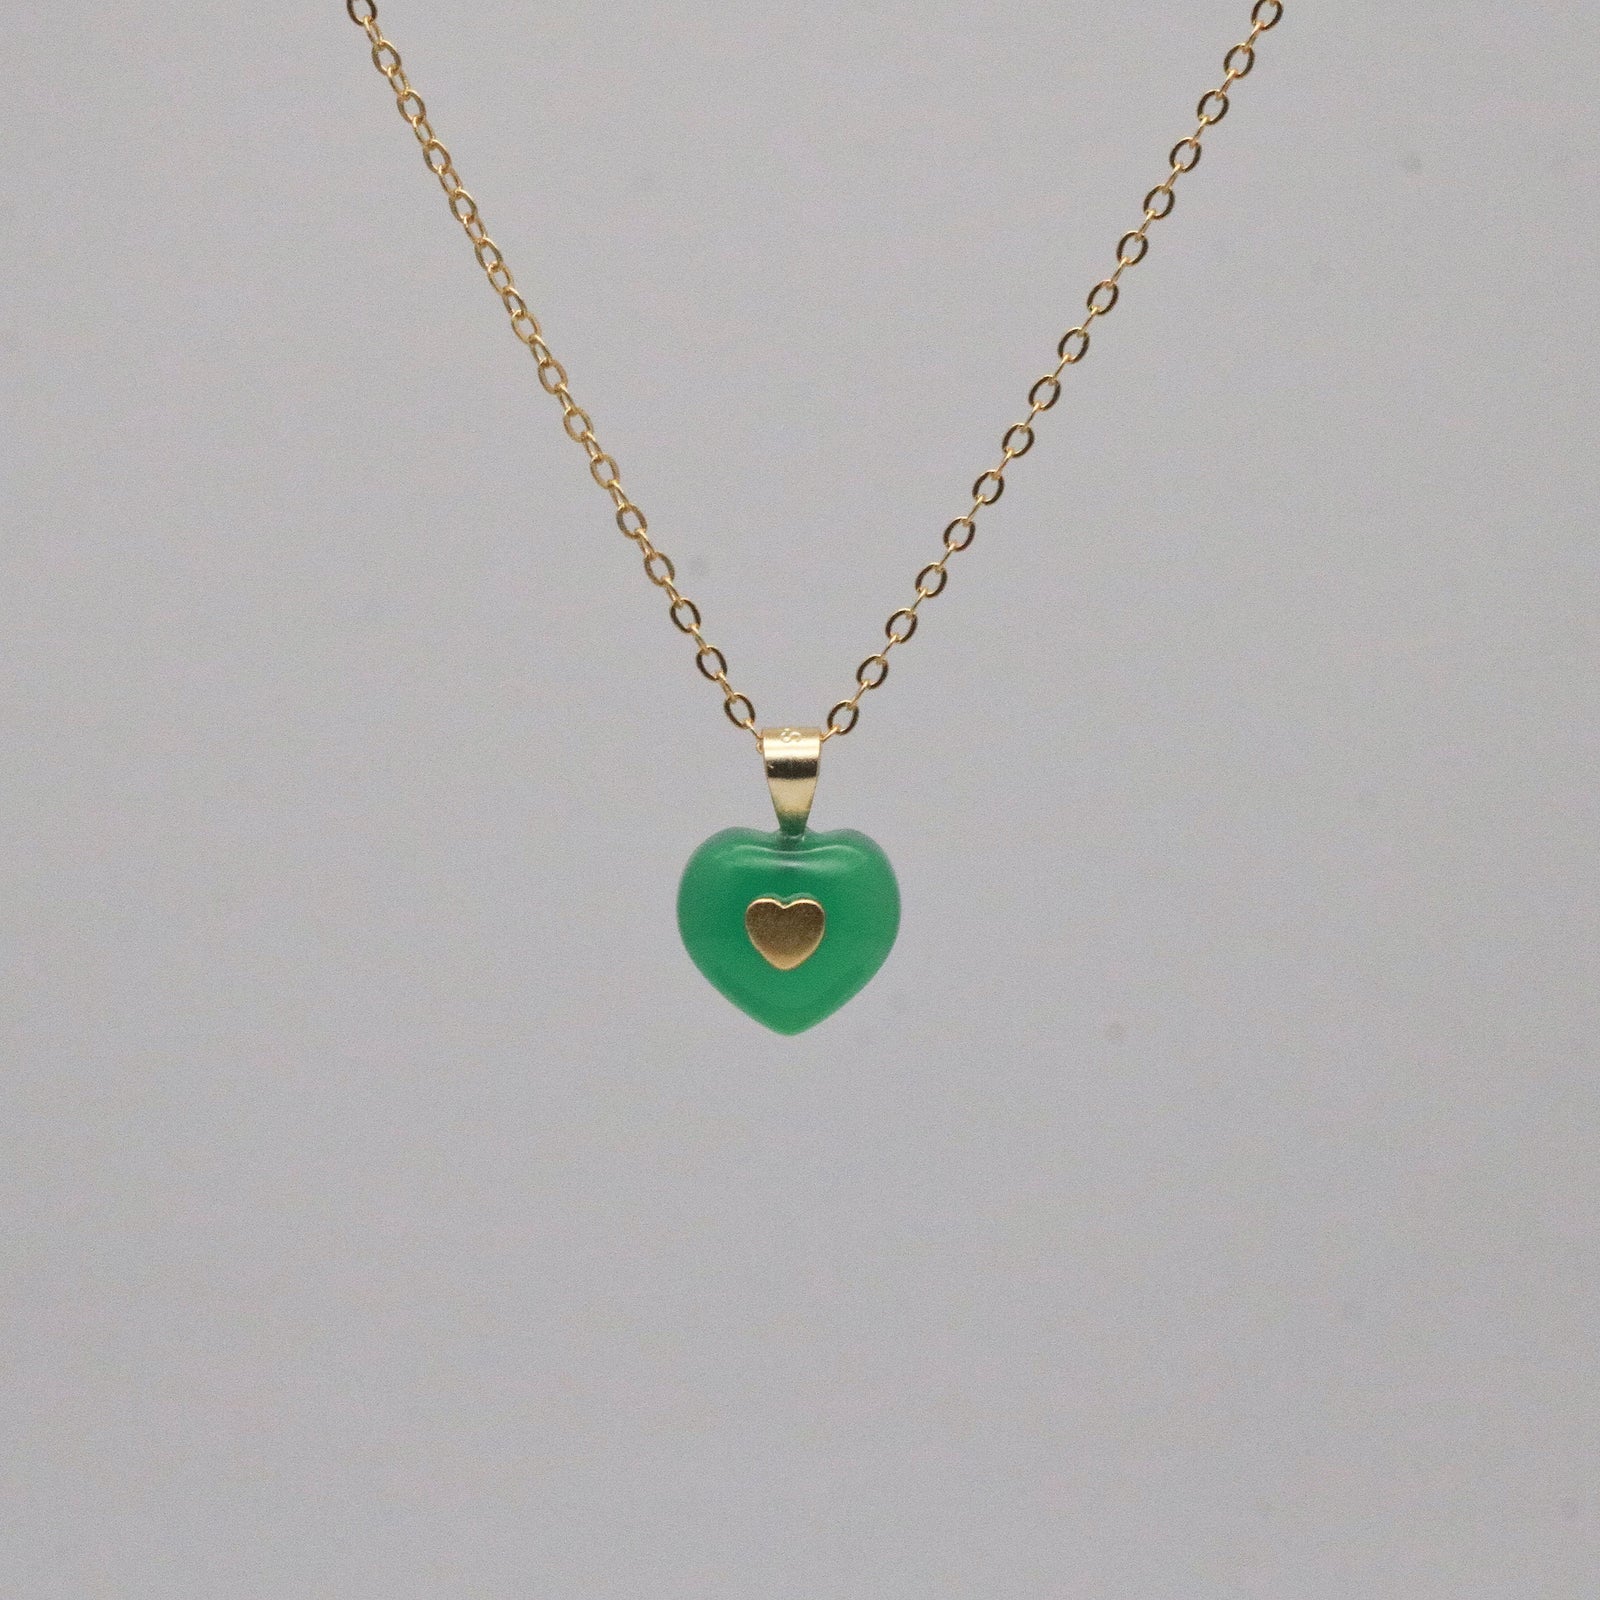 Green heart pendant necklace